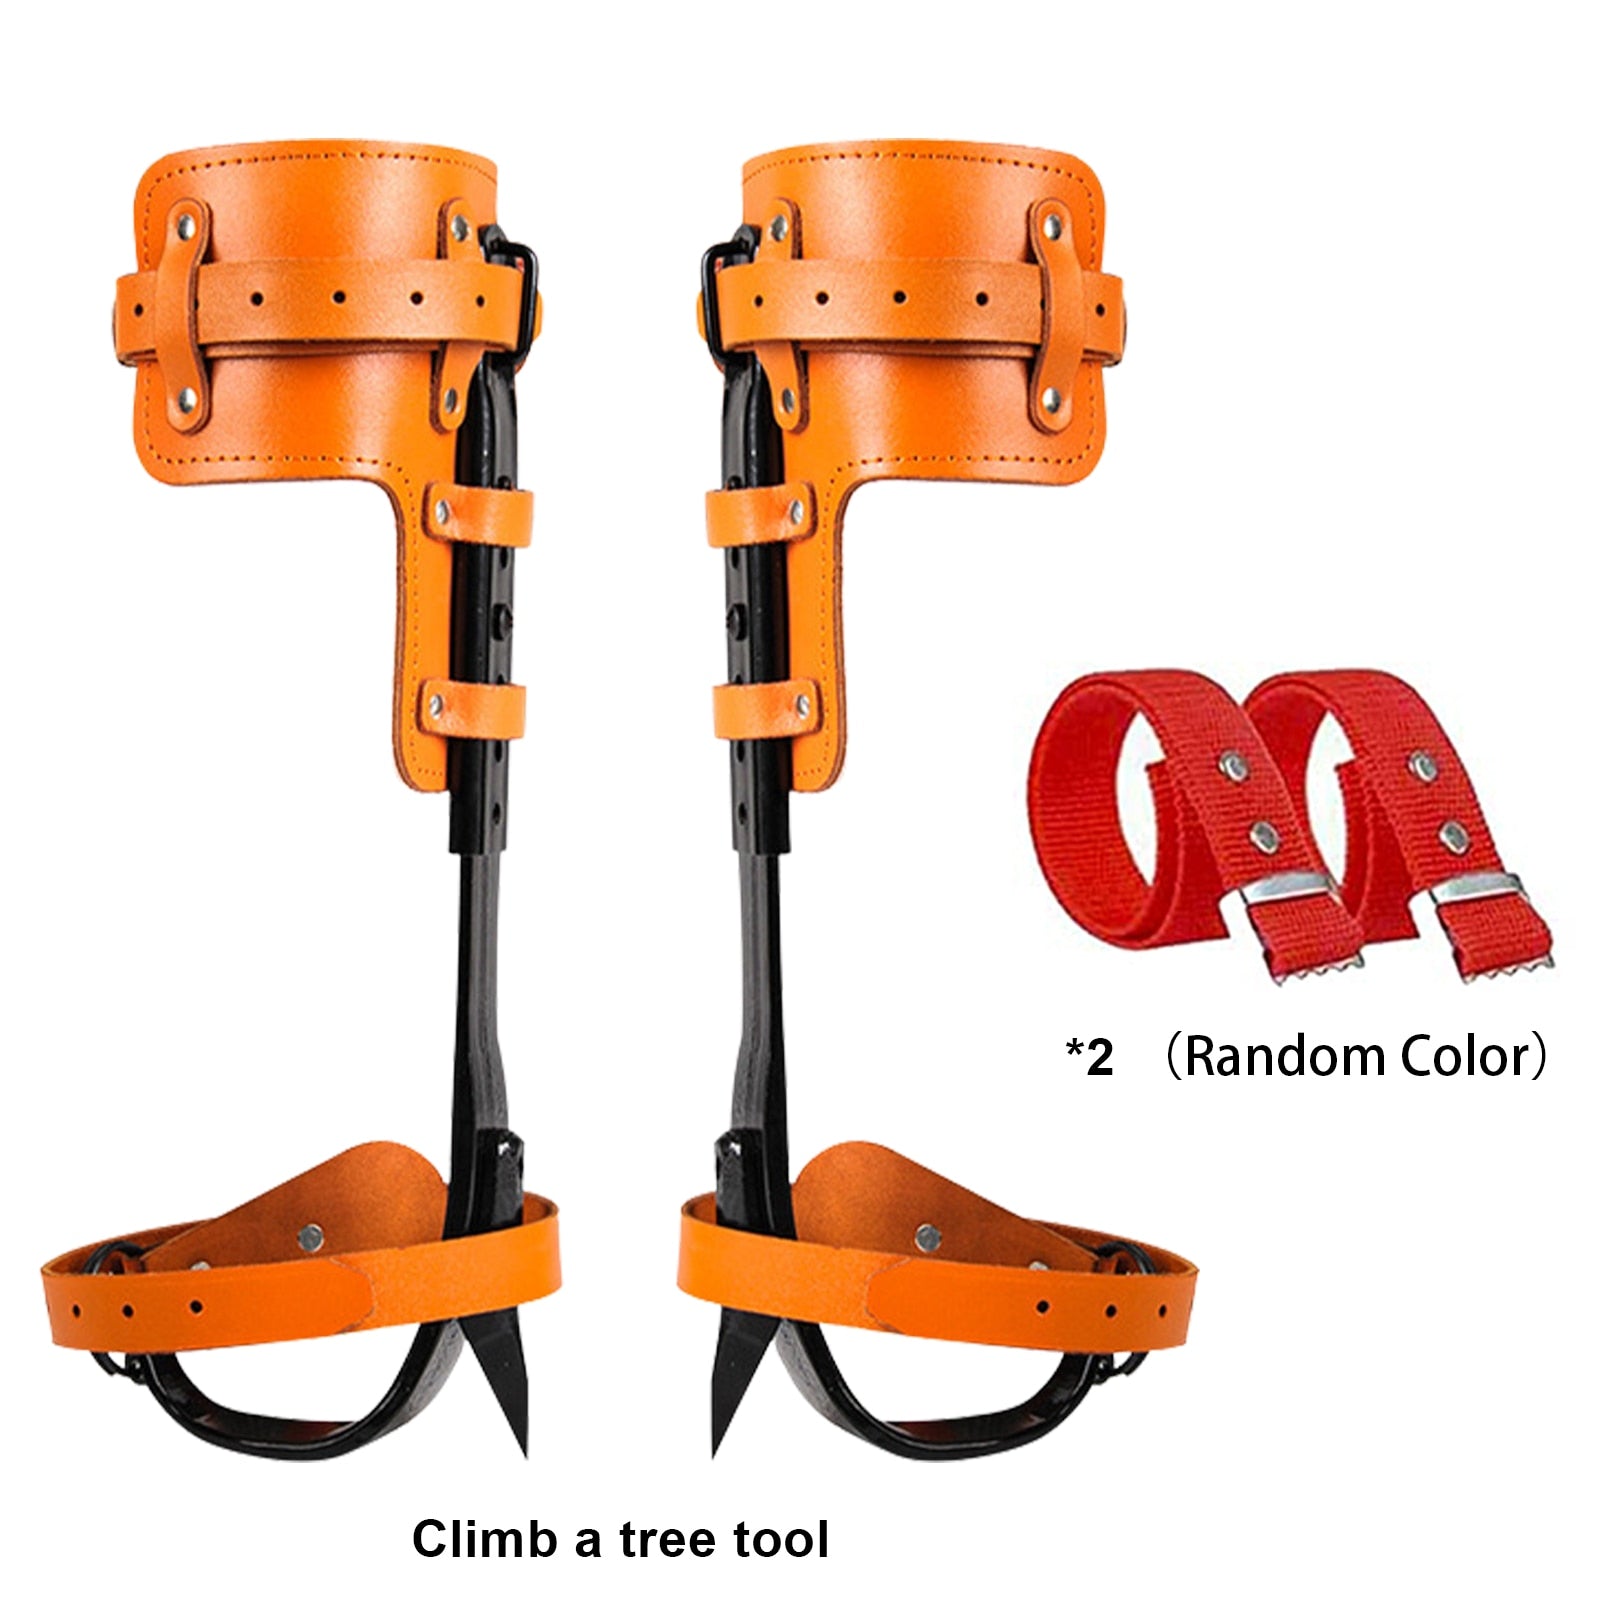 Balerz Adjusted Tree Climbing Spikes Stand-up Tree Climbing Spurs Integrated Tree Climbing Tool For Climbers Logging Hunting